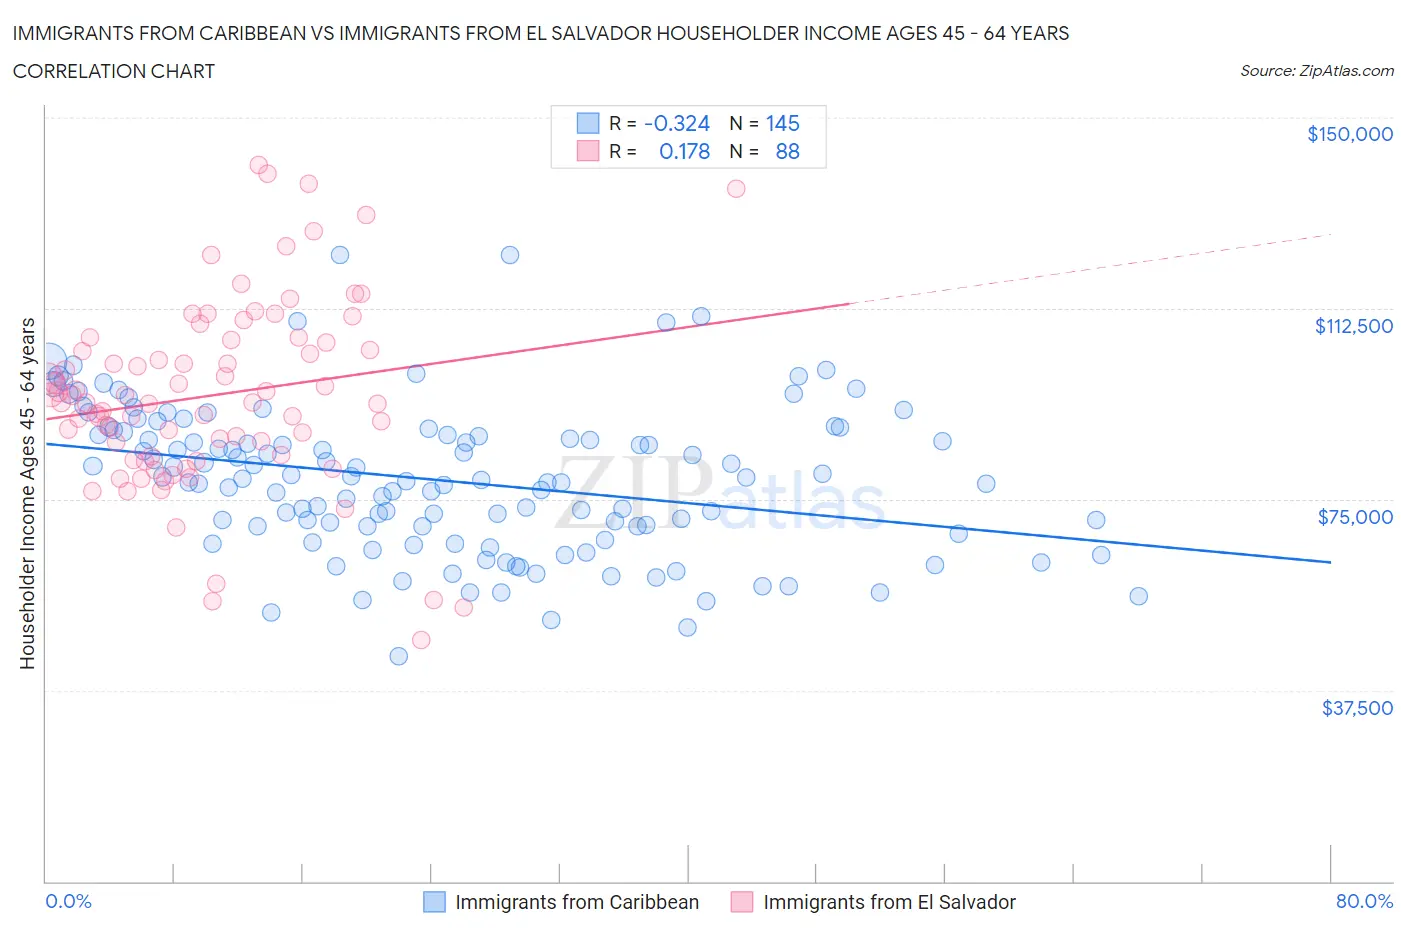 Immigrants from Caribbean vs Immigrants from El Salvador Householder Income Ages 45 - 64 years